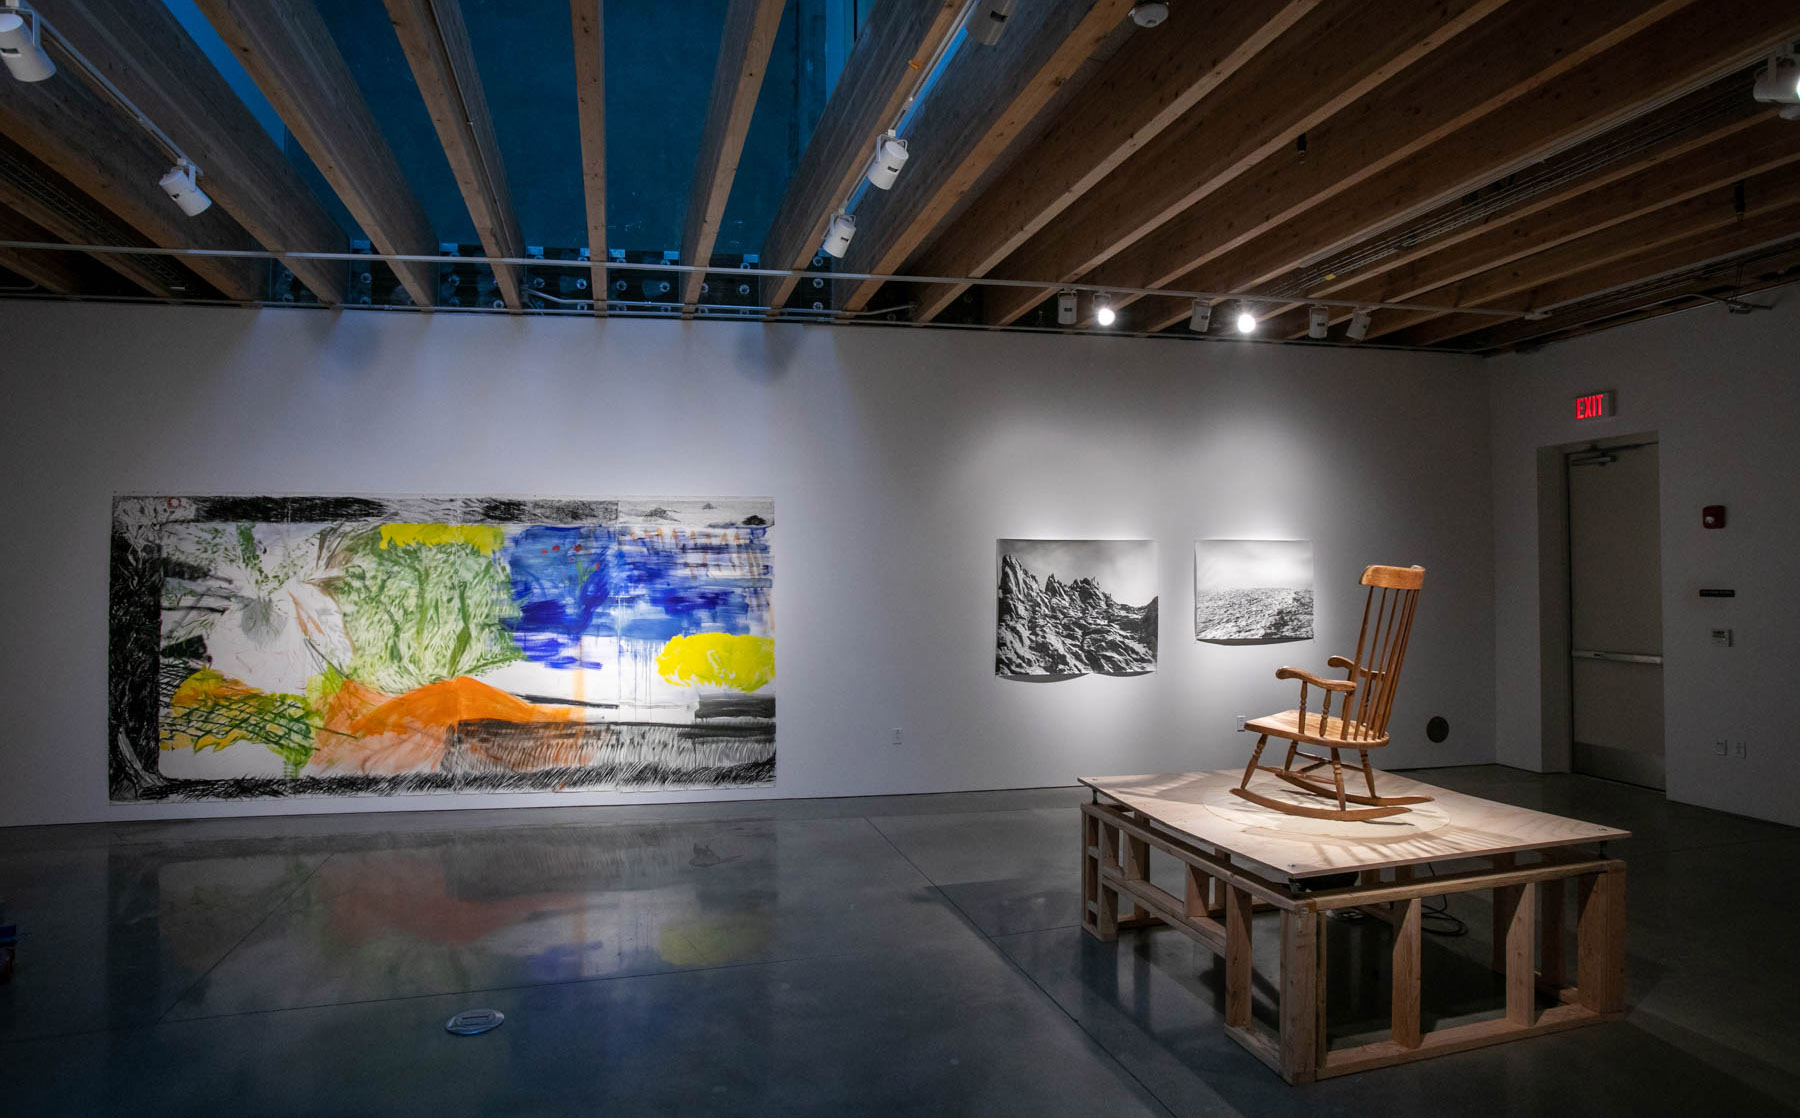 Paintings and sculpture installed in the Center Bay Gallery